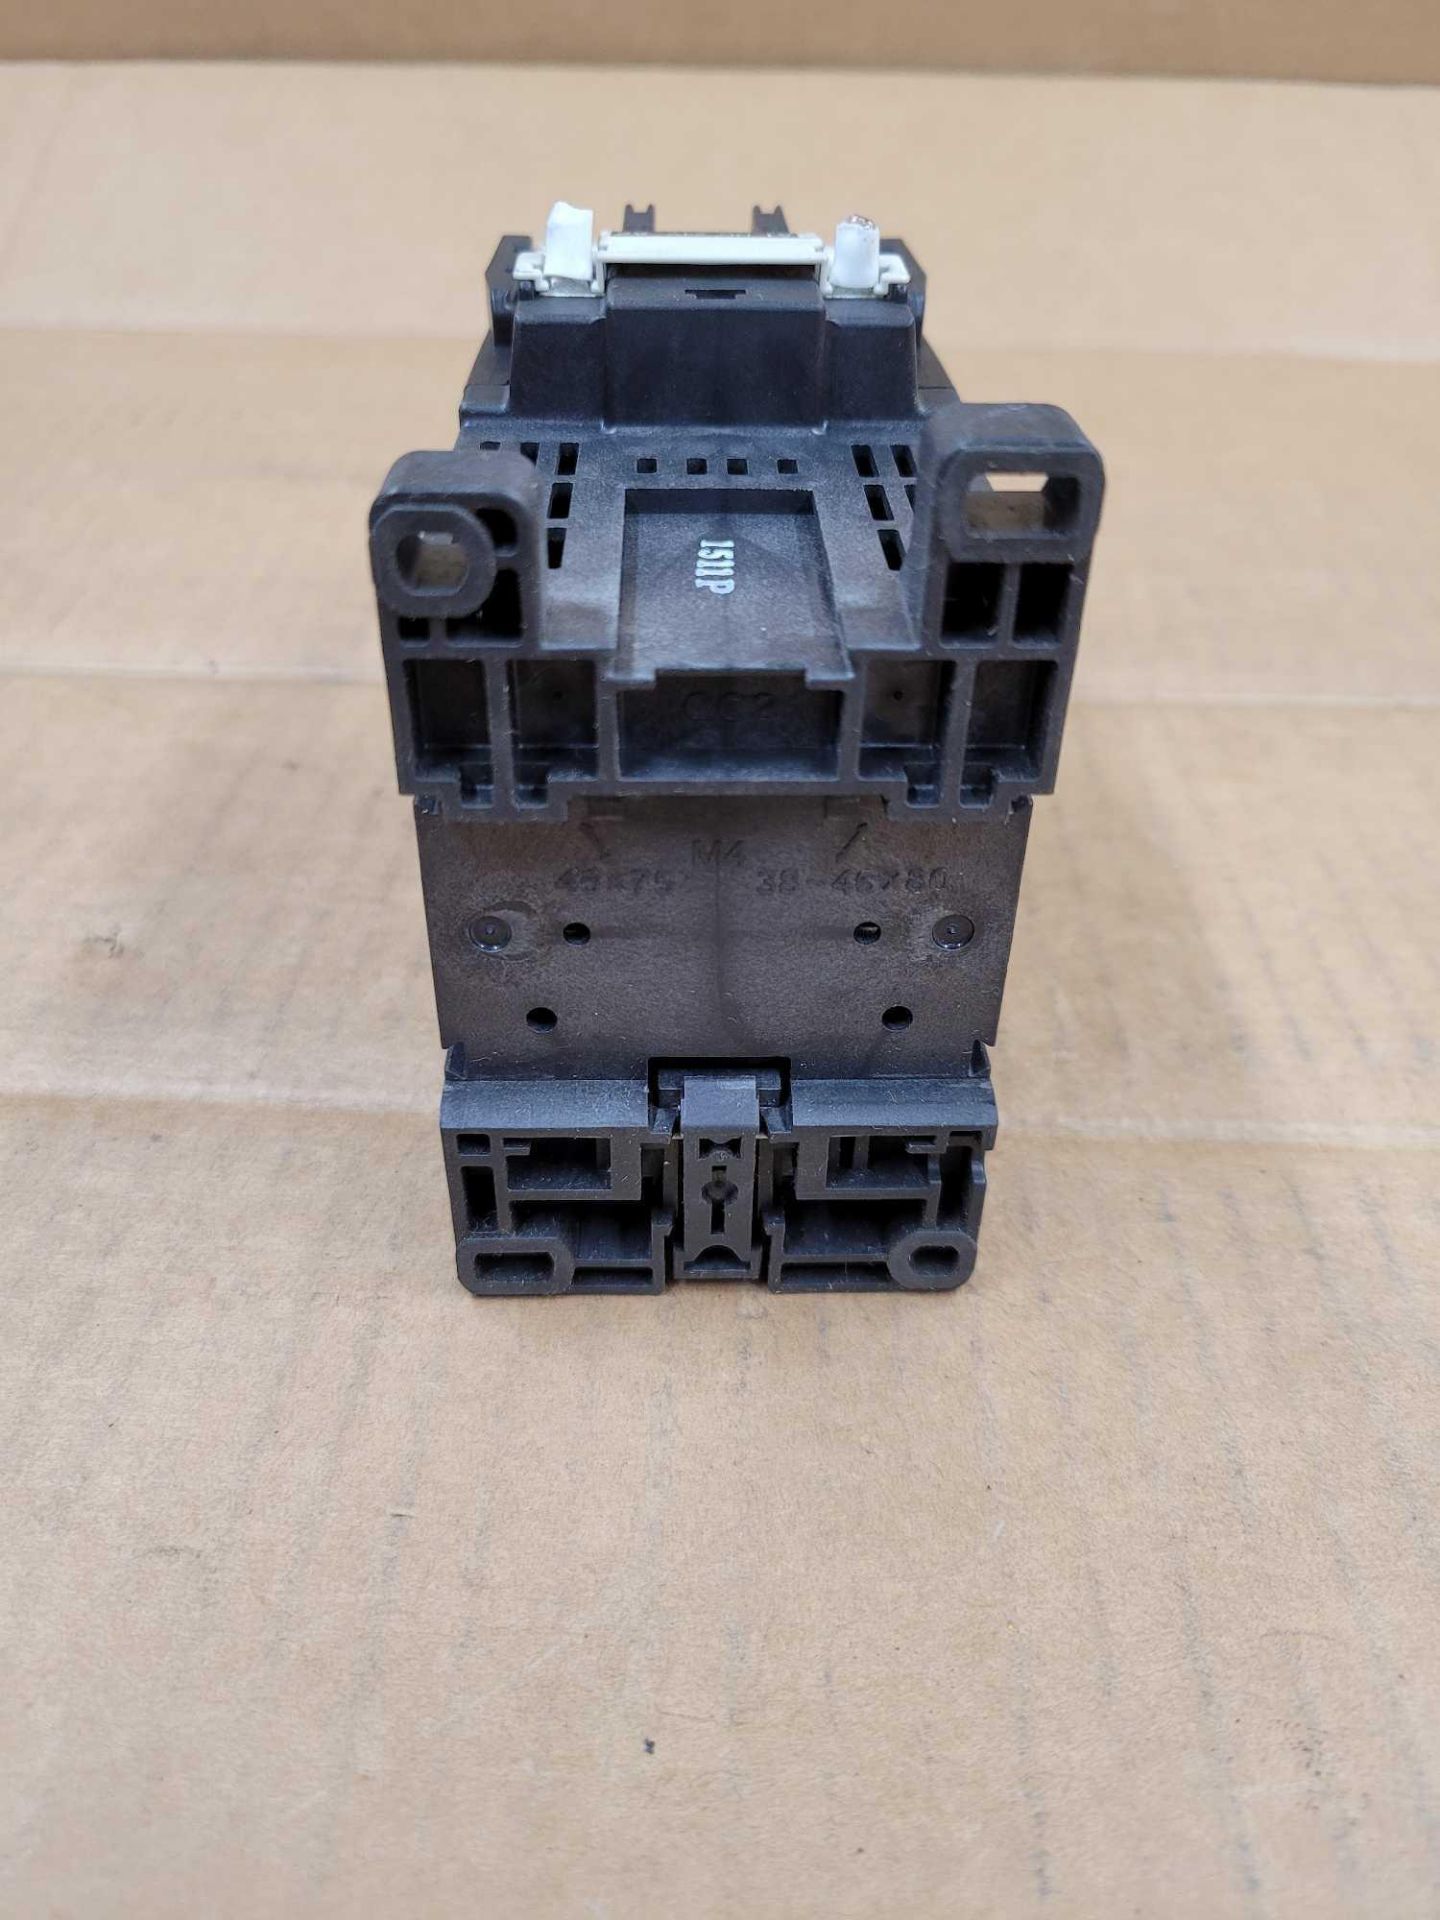 LOT OF 4 FUJI ELECTRIC SC-E2S/G  /  Contactor  /  Lot Weight: 7.2 lbs - Image 7 of 9